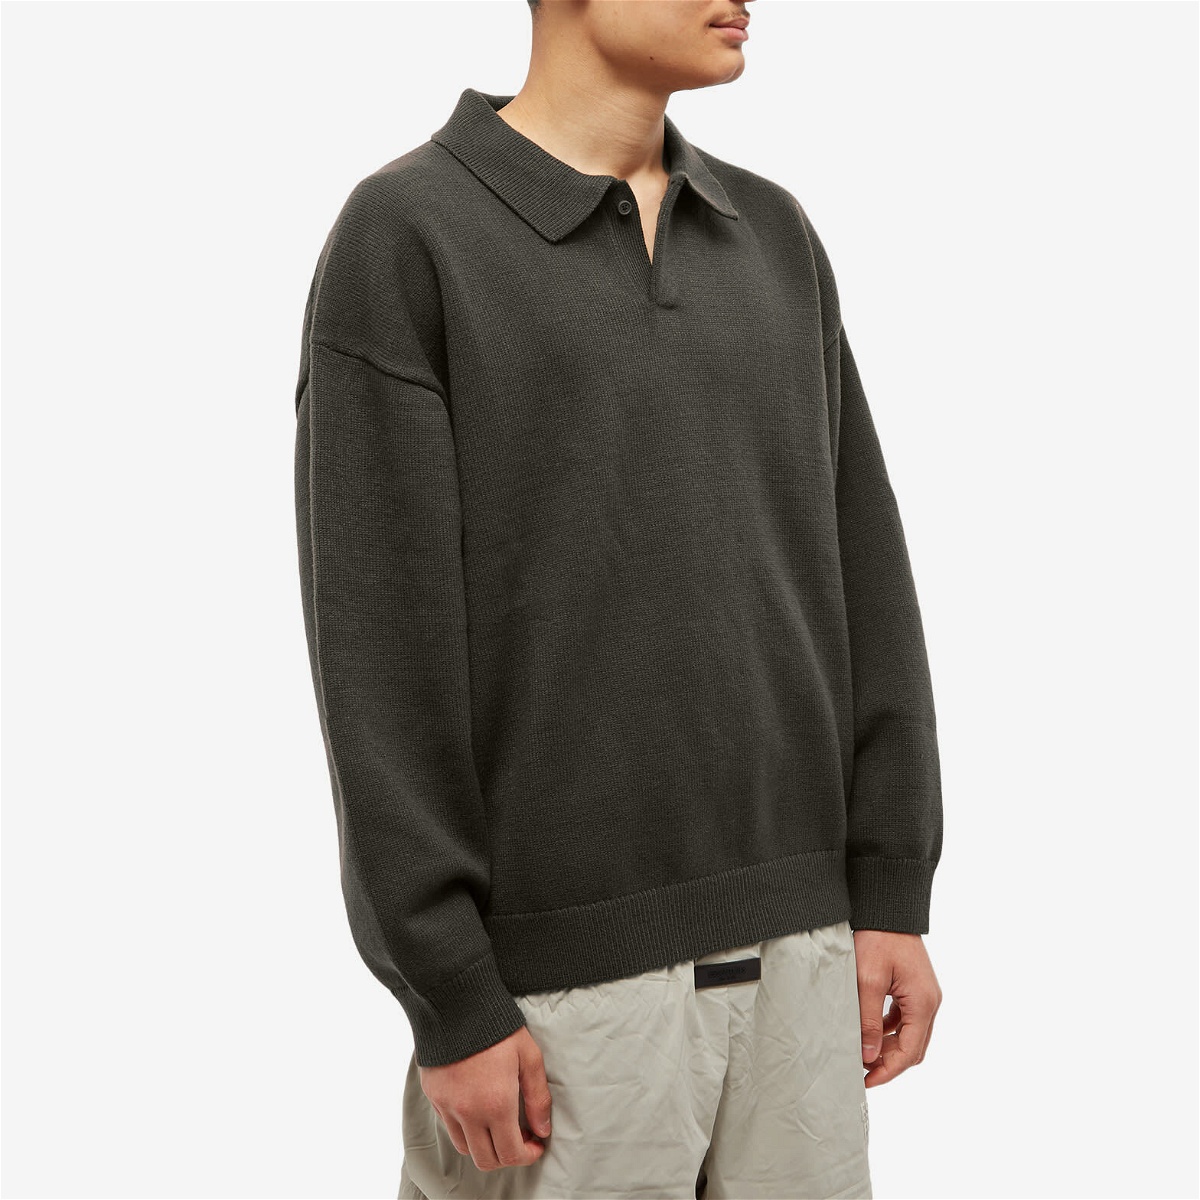 Fear of God ESSENTIALS Men's Knitted Polo Shirt in Off-Black Fear